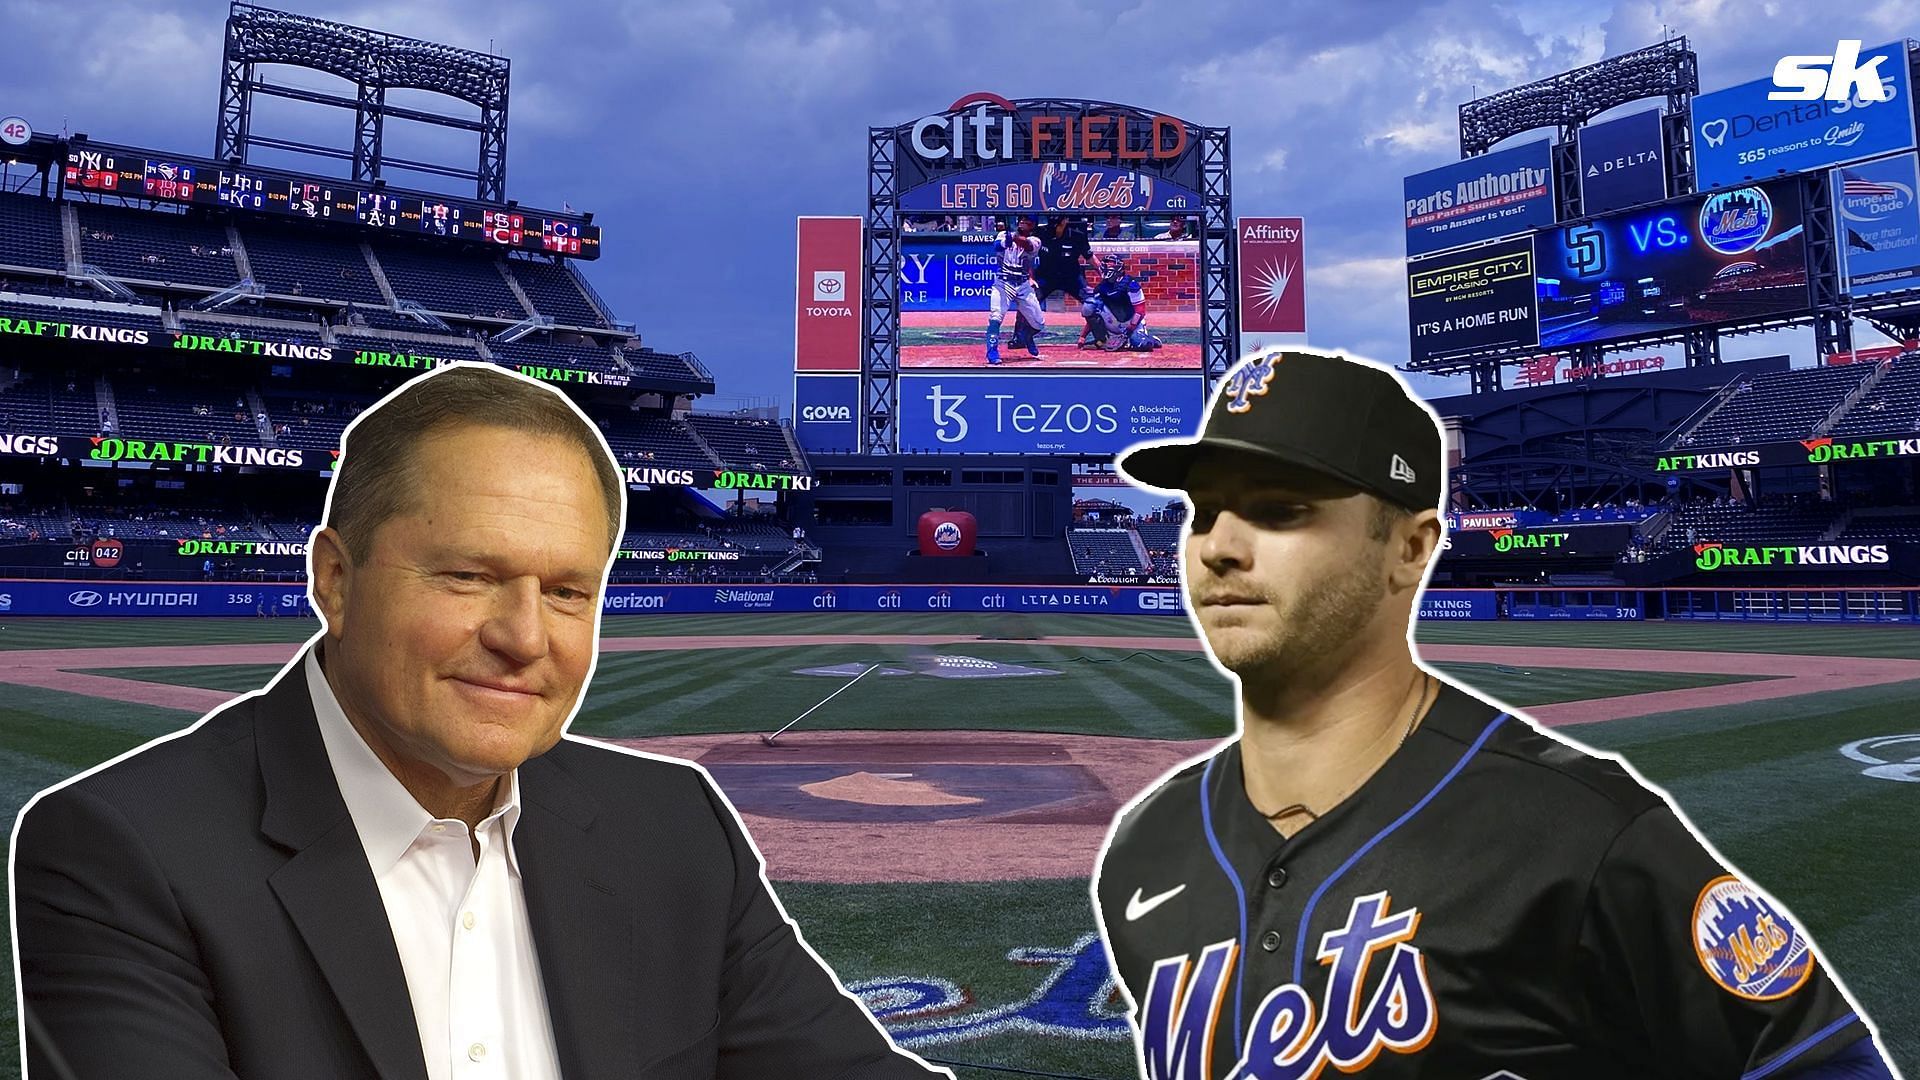 Super agent Scott Boras says that contract negotiations between Pete Alonso and the New York Mets are ongoing